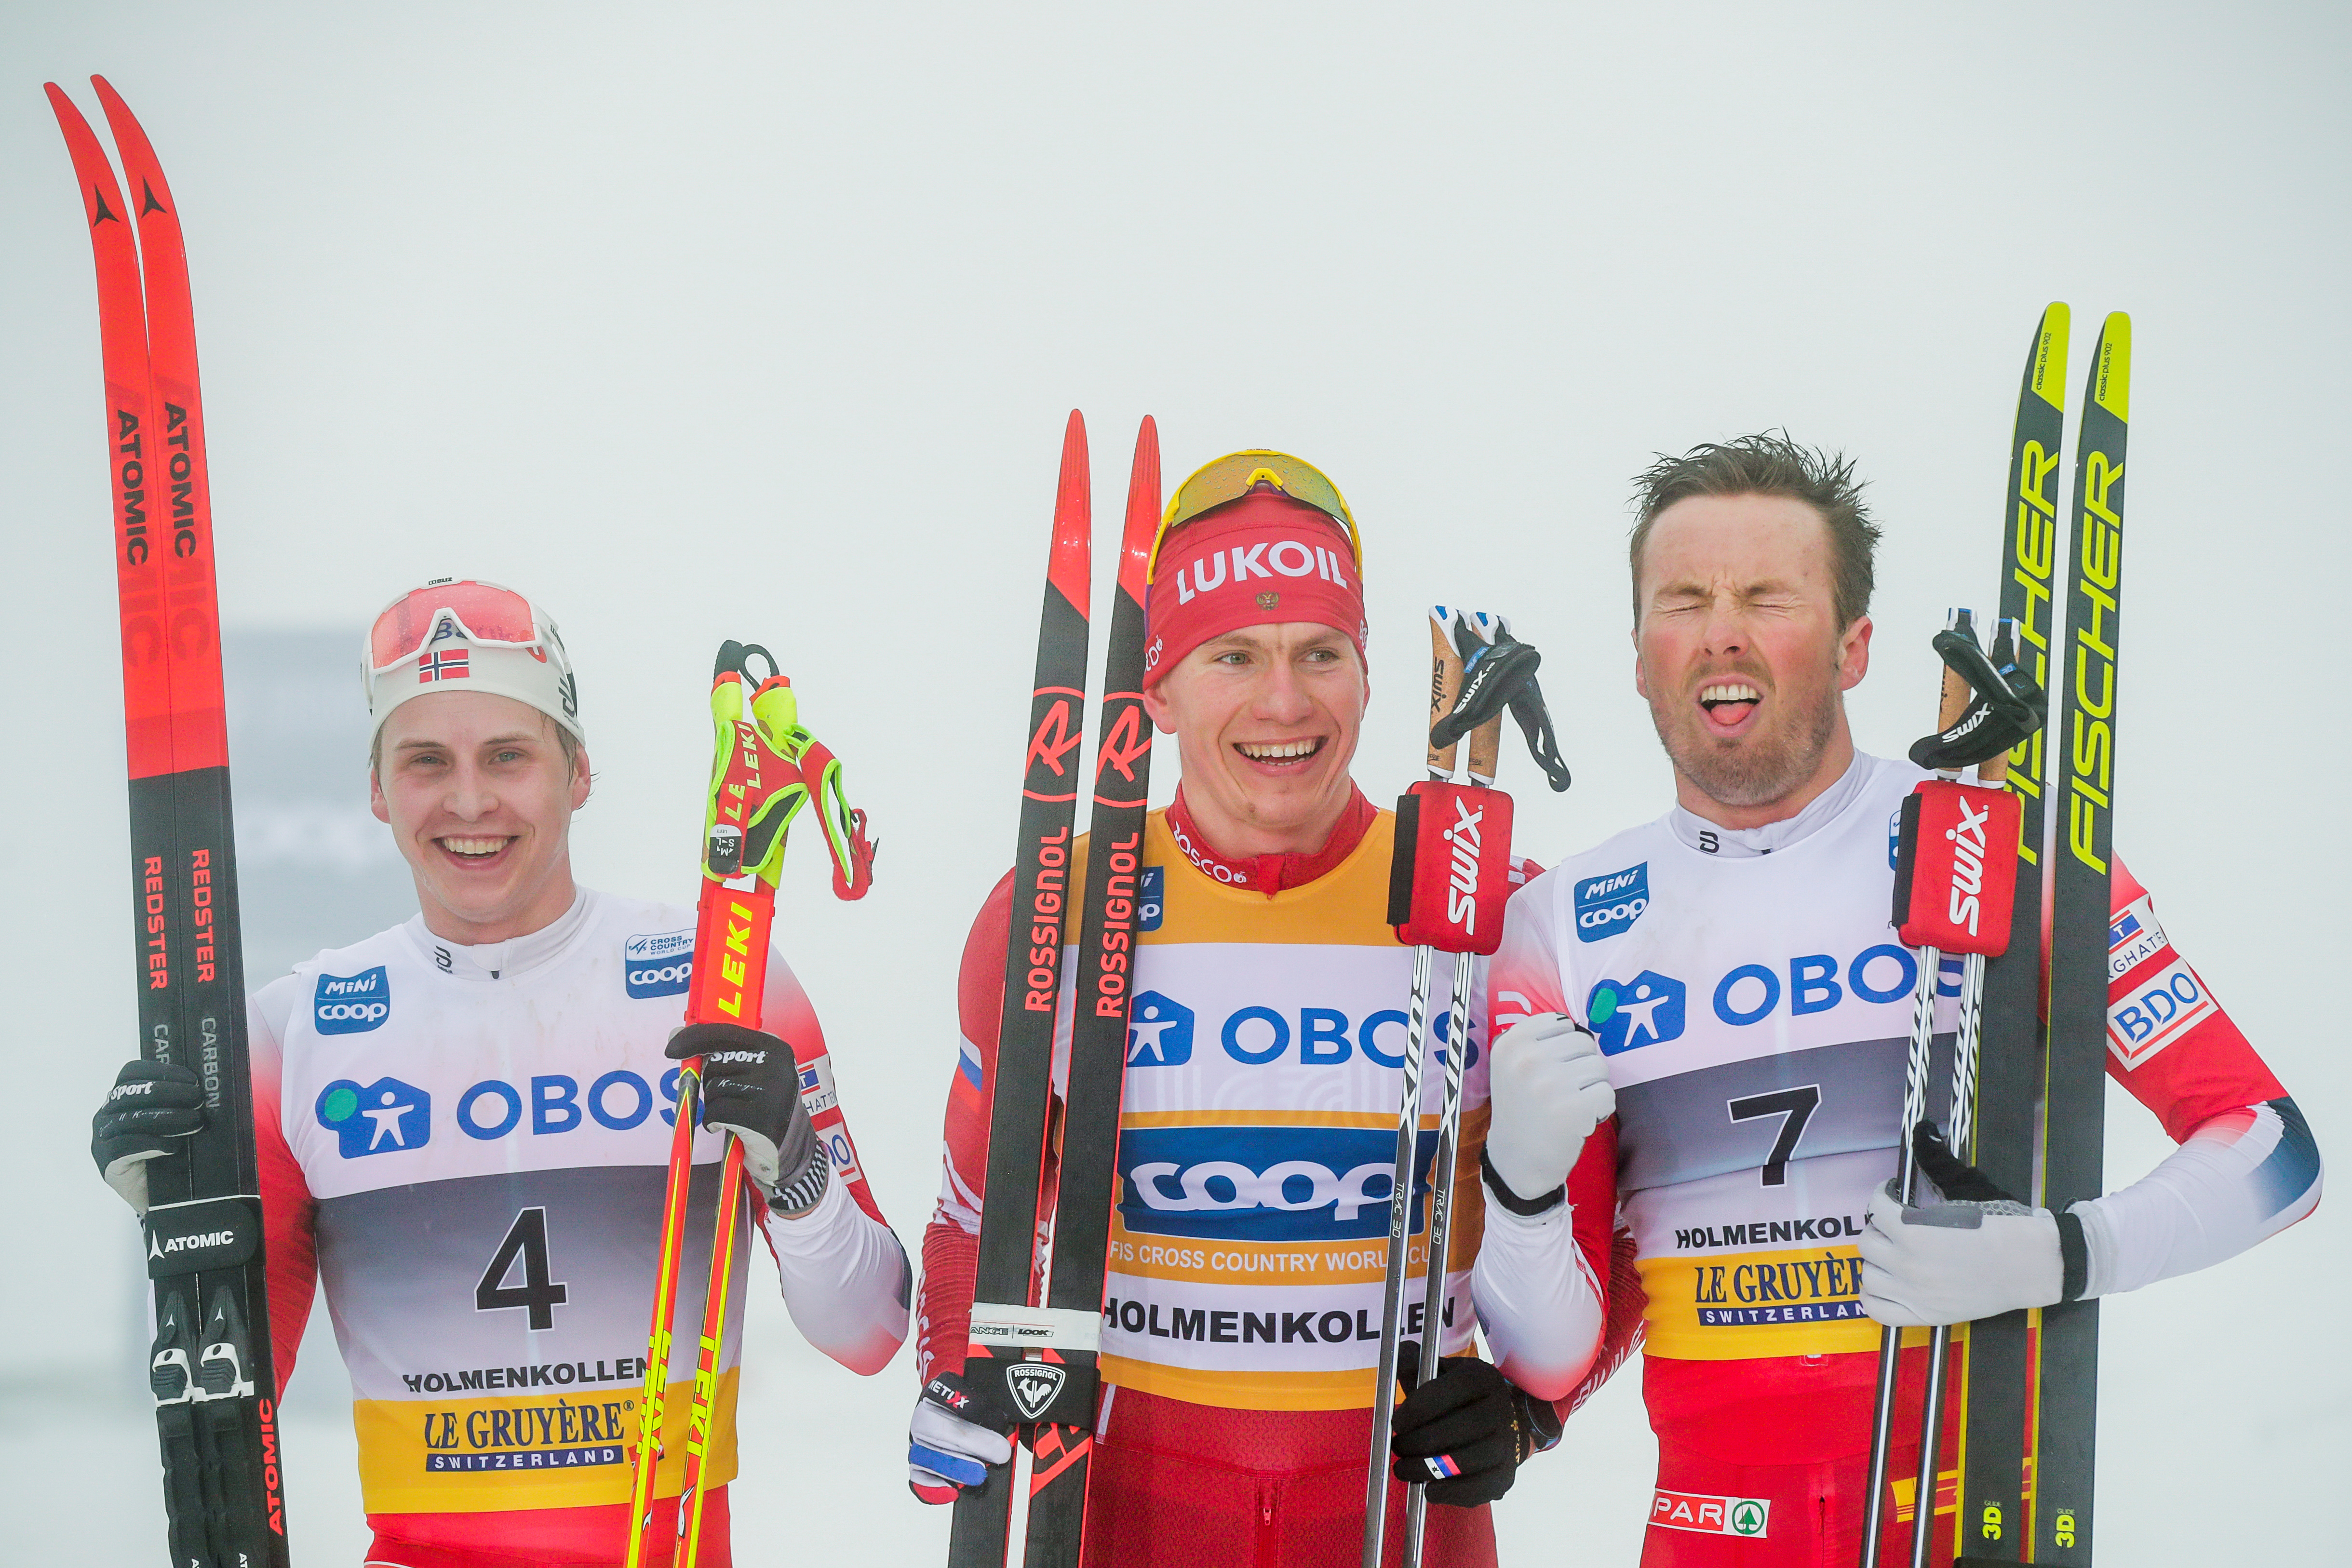 Cross Country Skiing - FIS Cross-Country World Cup - Men's 50 km Mass Start - Oslo, Norway - March 8, 2020. Norway's Simen Hegstad Kruger, Russia's Aleksandr Bolshunov and Norway's Emil Iversen after the final. Terje Bendiksby/NTB Scanpix/via REUTERS   ATTENTION EDITORS - THIS IMAGE WAS PROVIDED BY A THIRD PARTY. NORWAY OUT. NO COMMERCIAL OR EDITORIAL SALES IN NORWAY.